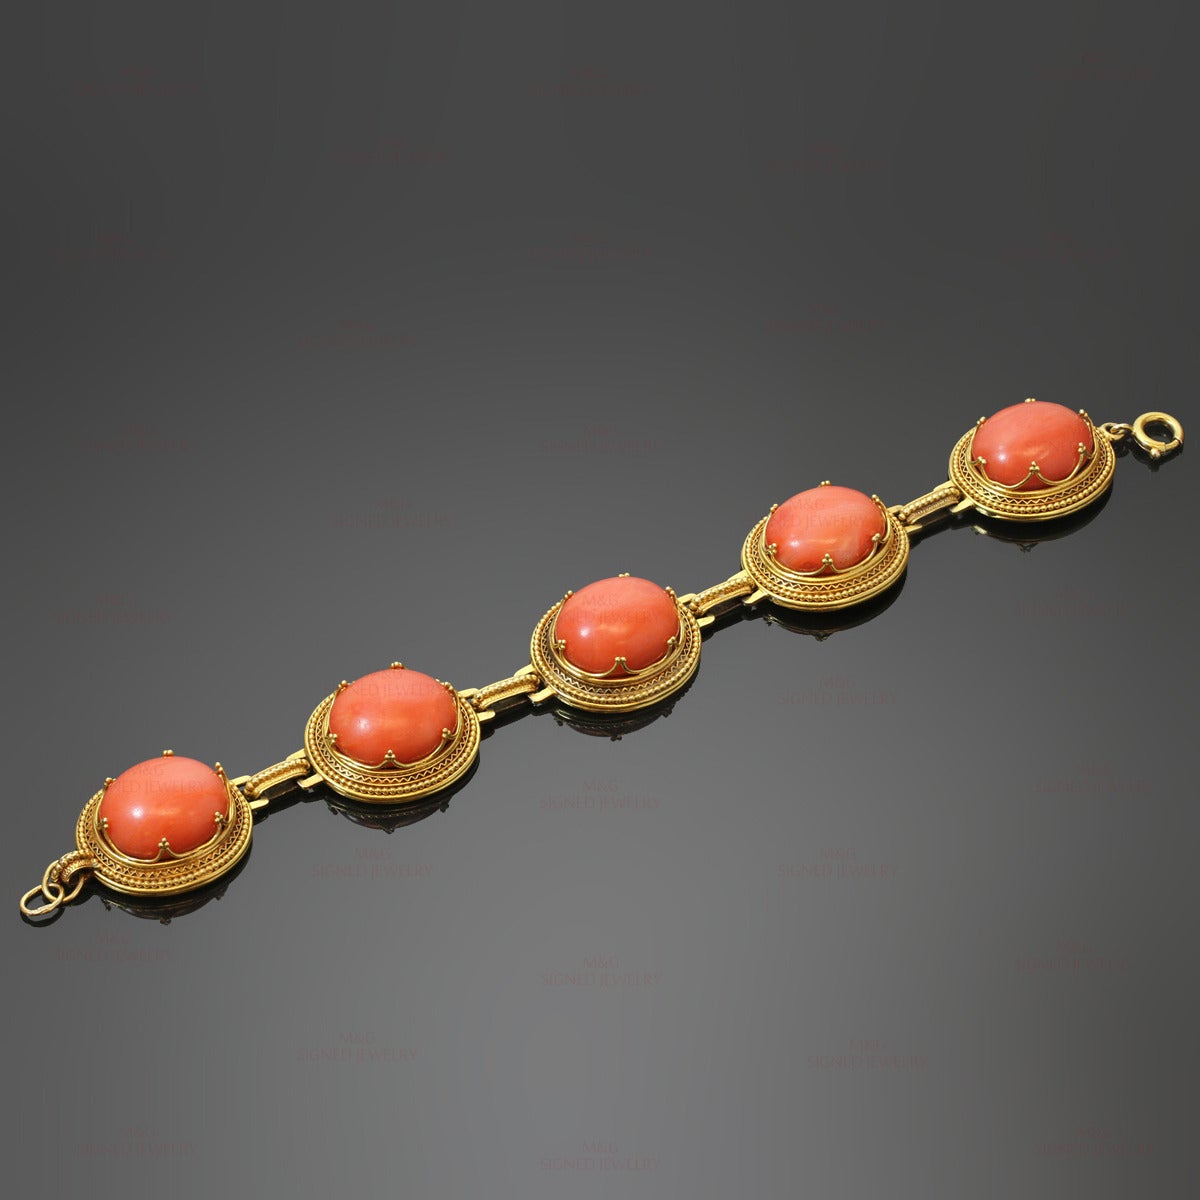 This rare Victorian link bracelet features a fantastic filigree design crafted in 14k yellow gold and set with oval natural red corals measuring between 9.7mm x 14.3mm x 16.6m to 8.5mm x 13.8mm x 16.2mm. Made in United States circa 1900s.